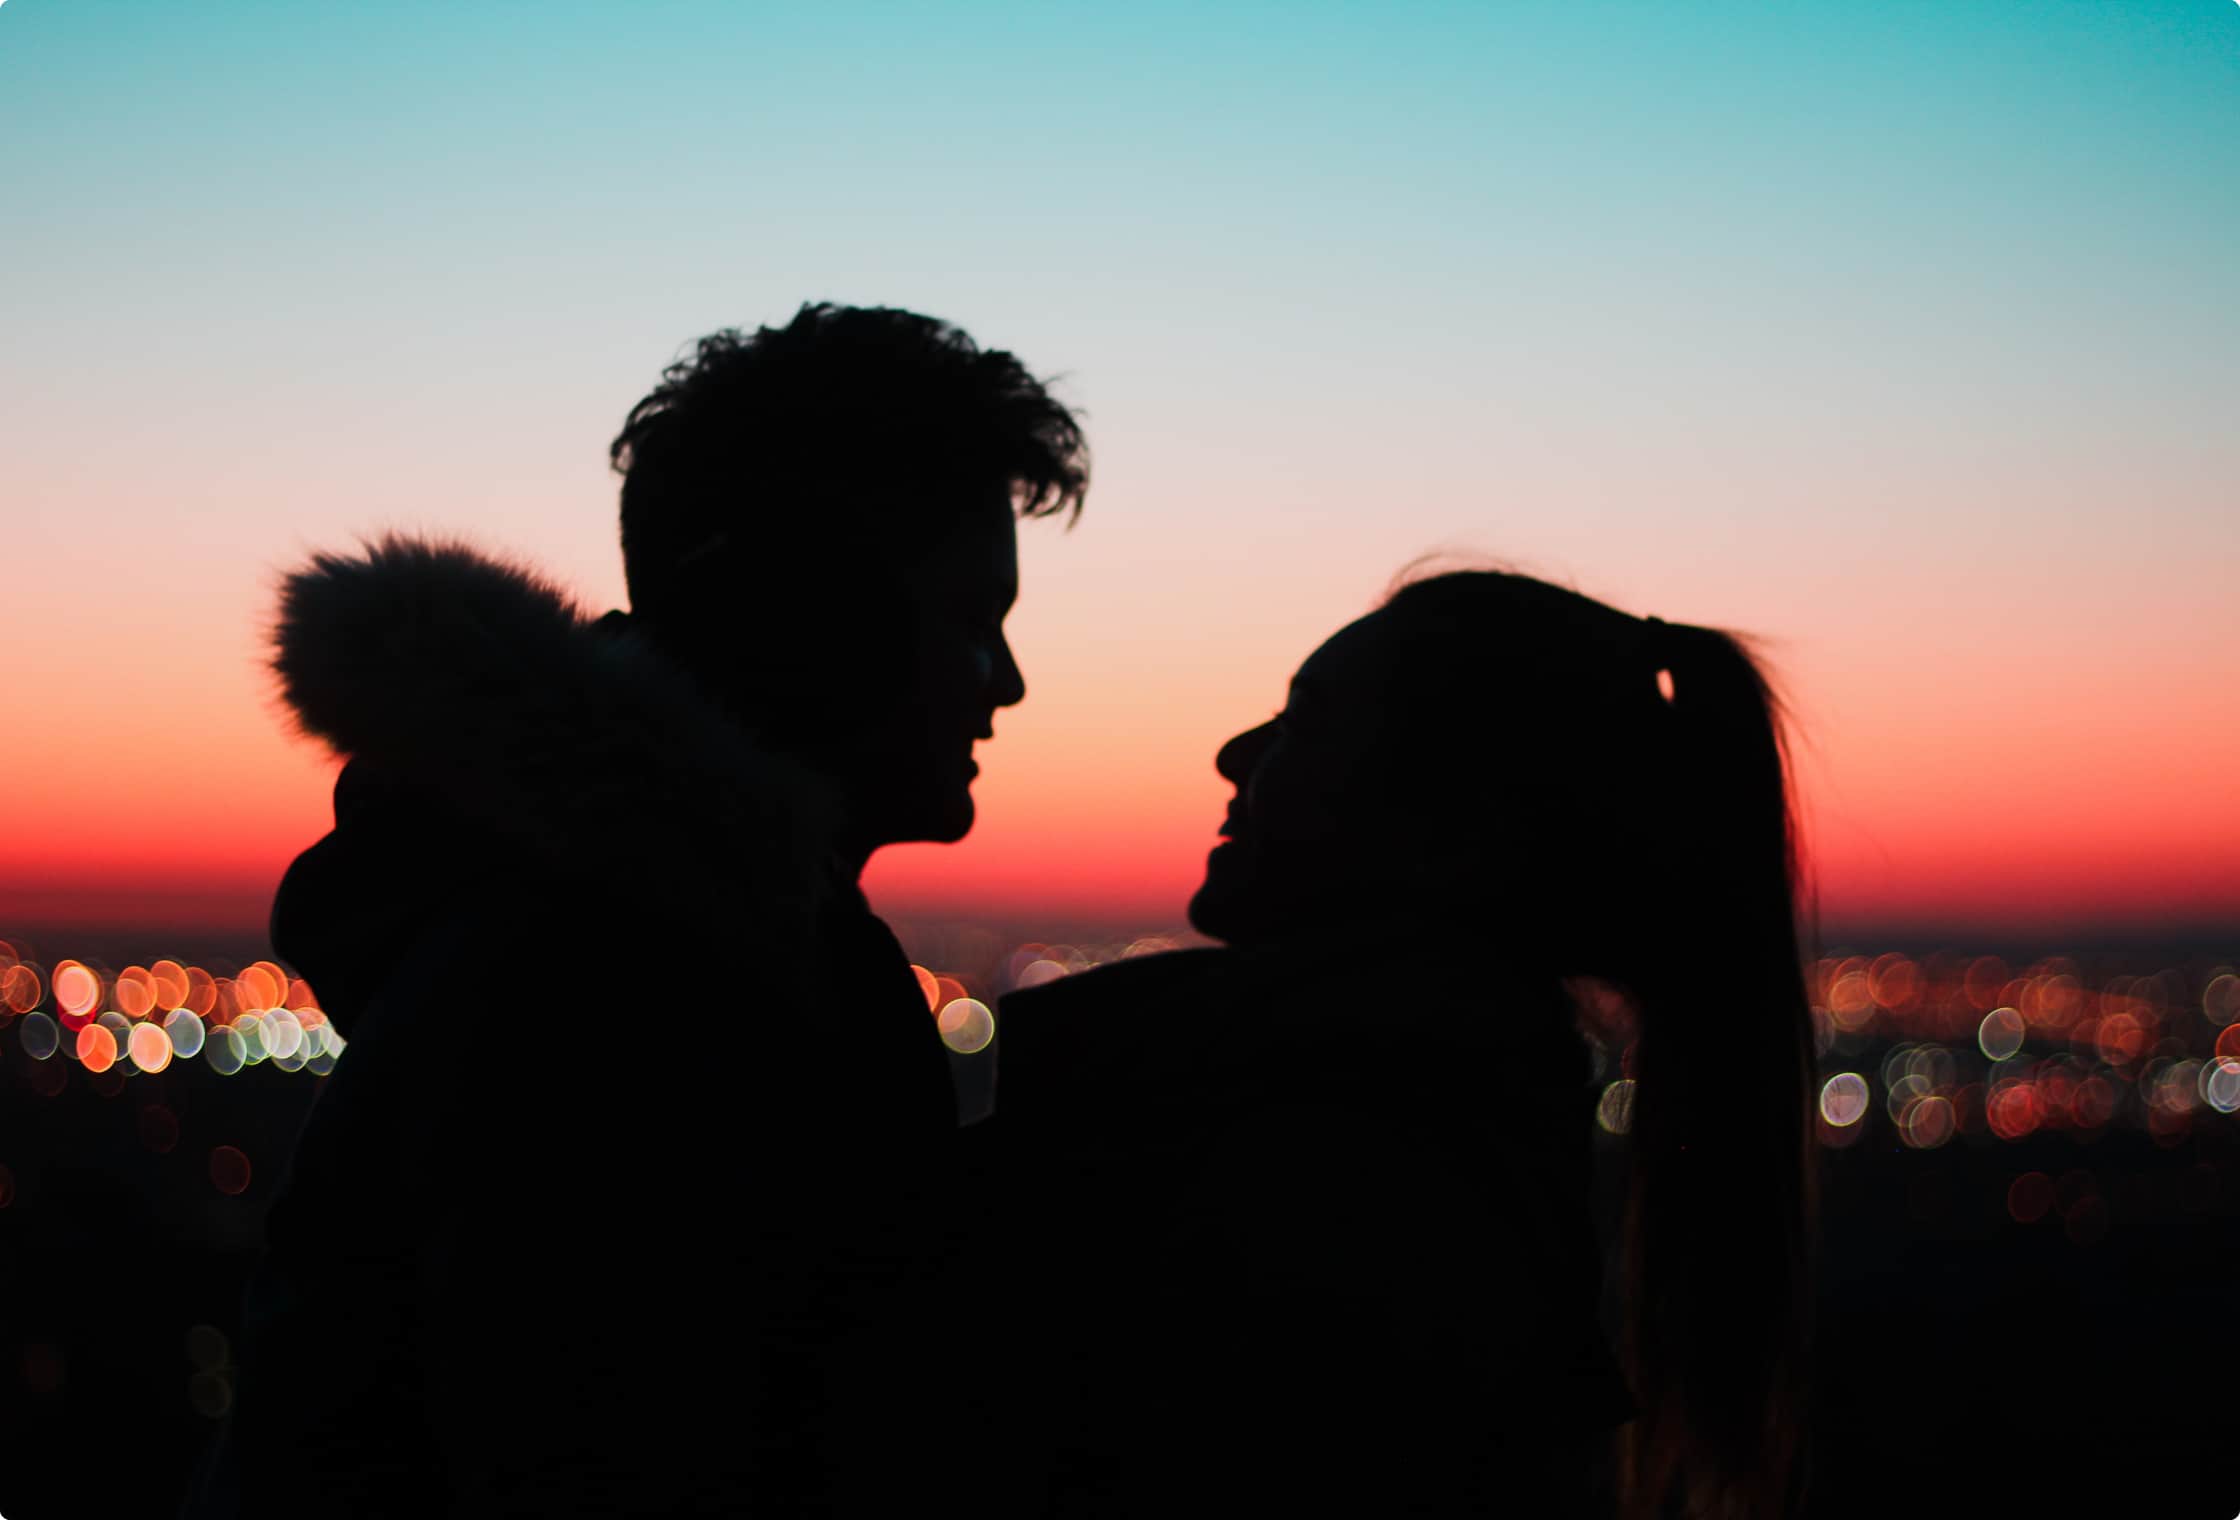 Two people dating on a sunset view